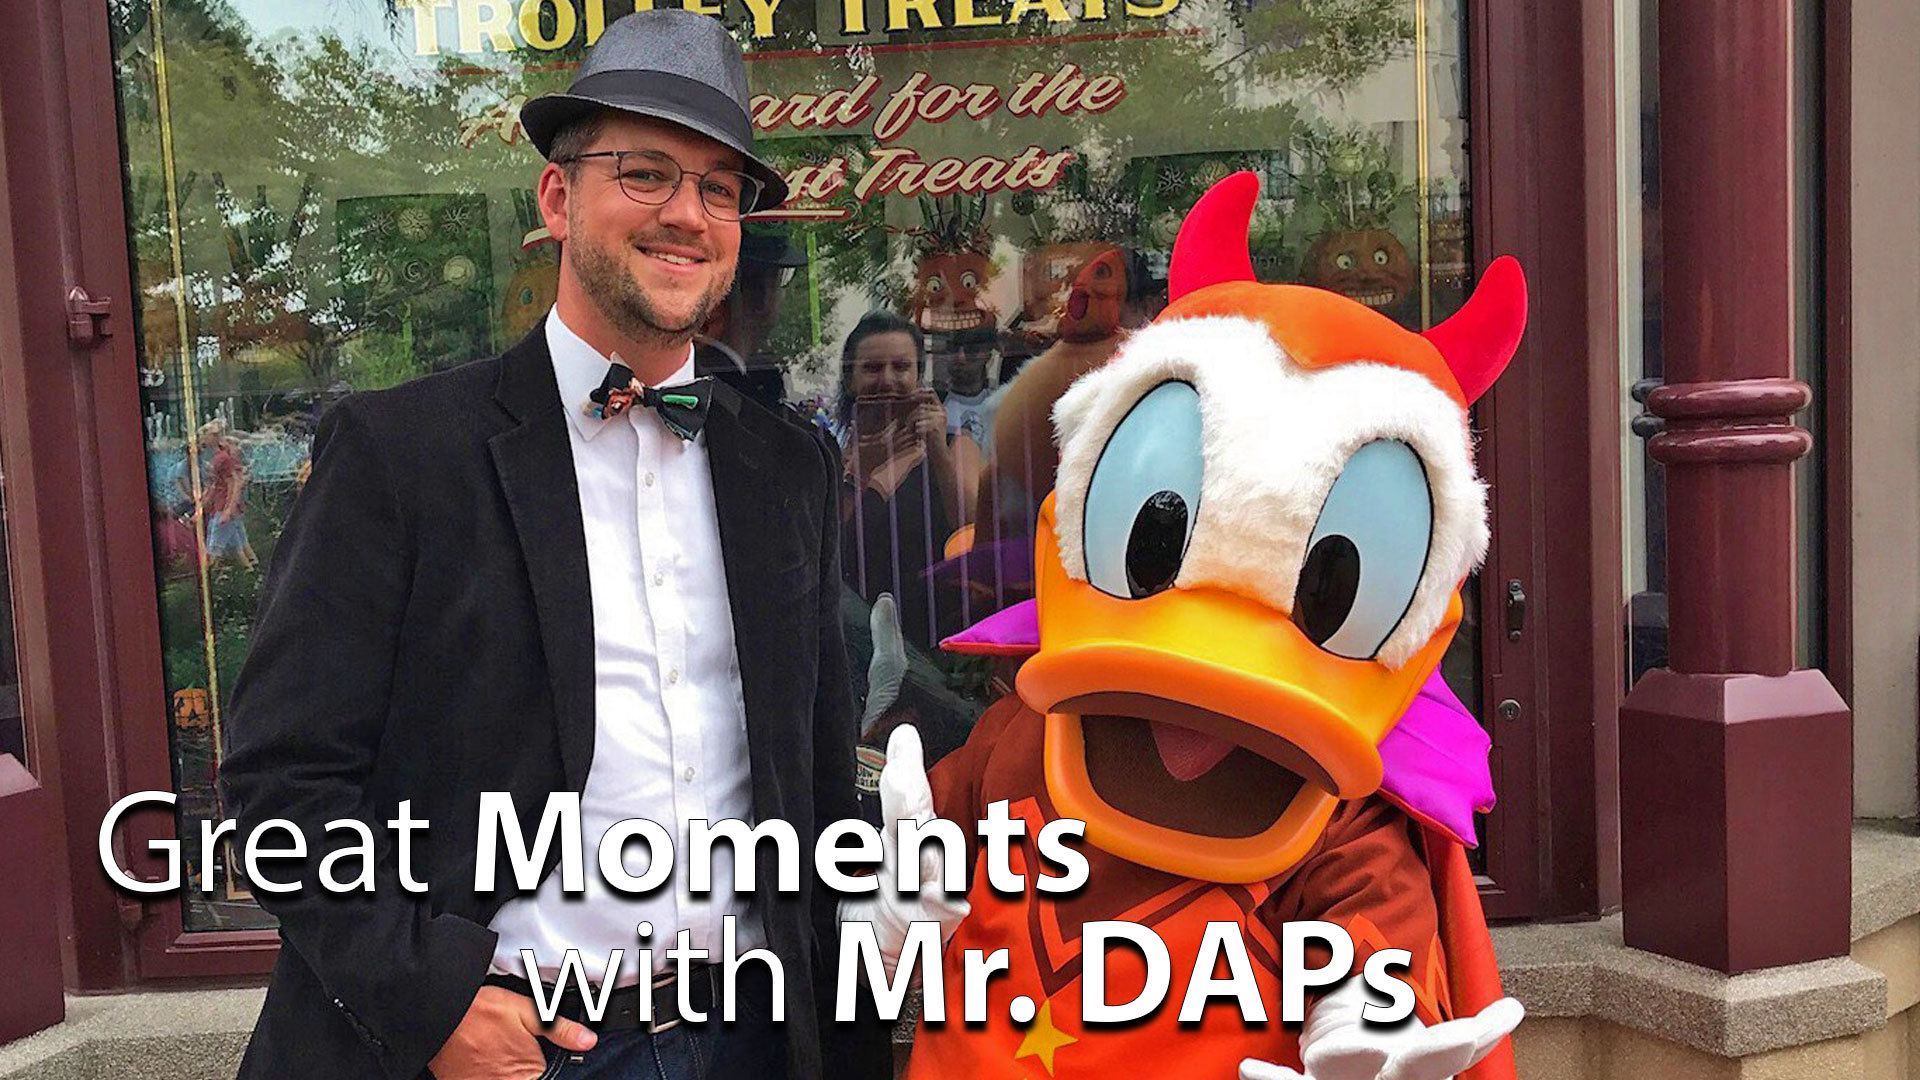 SCAREolers, EPCOT, THOR, and more! - Great Moments with Mr. DAPs